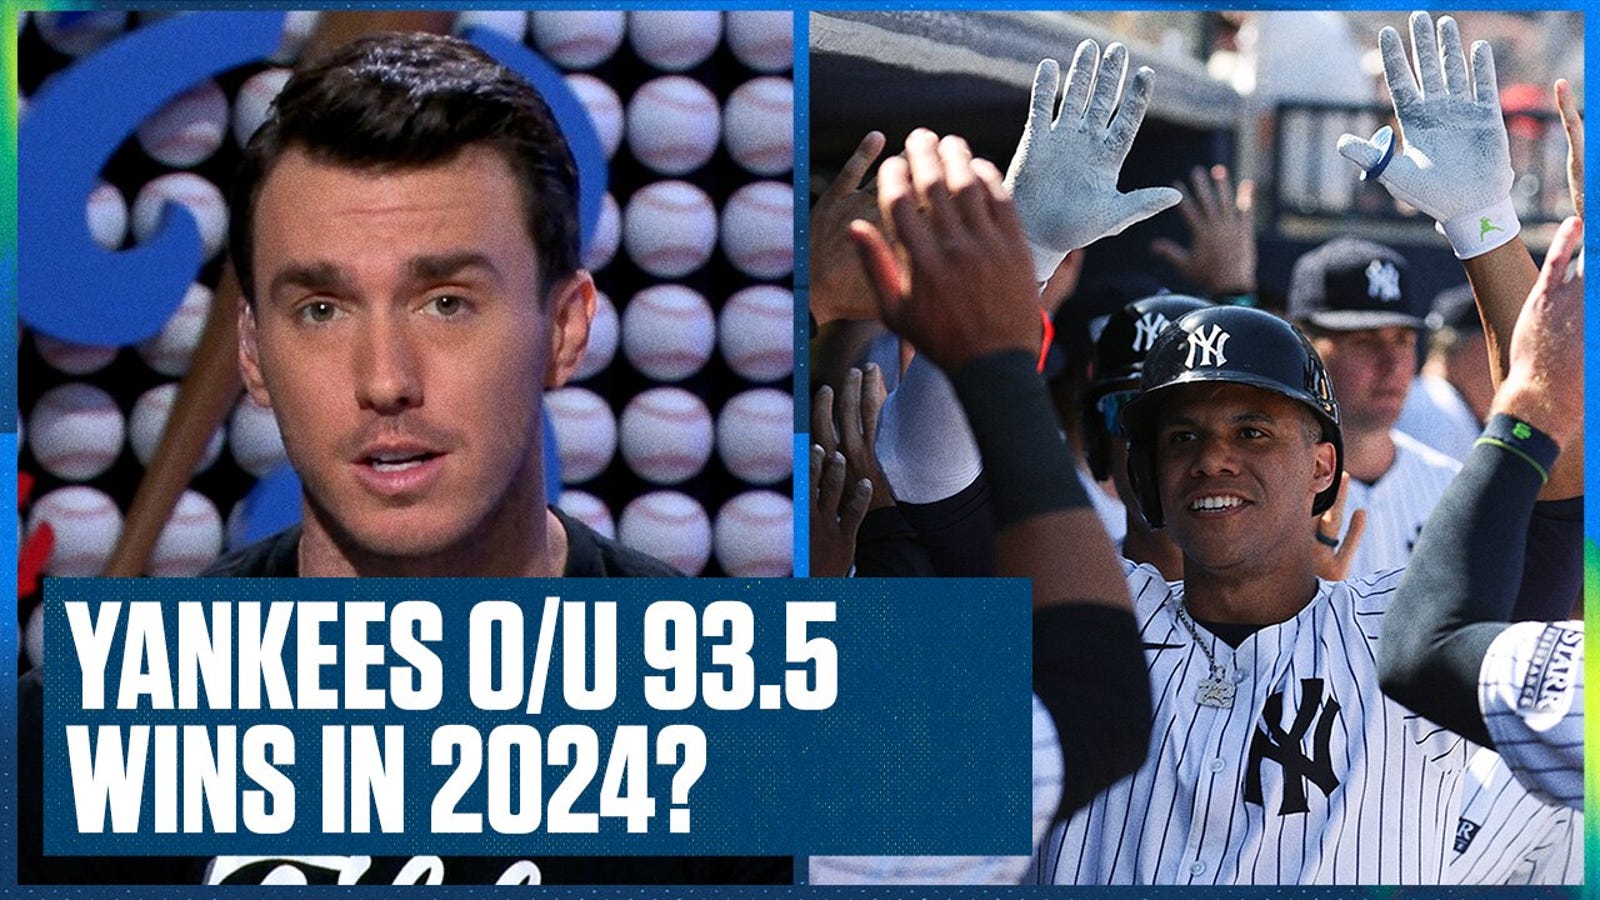 Will the New York Yankees exceed their 93.5-win Vegas projection in 2024?